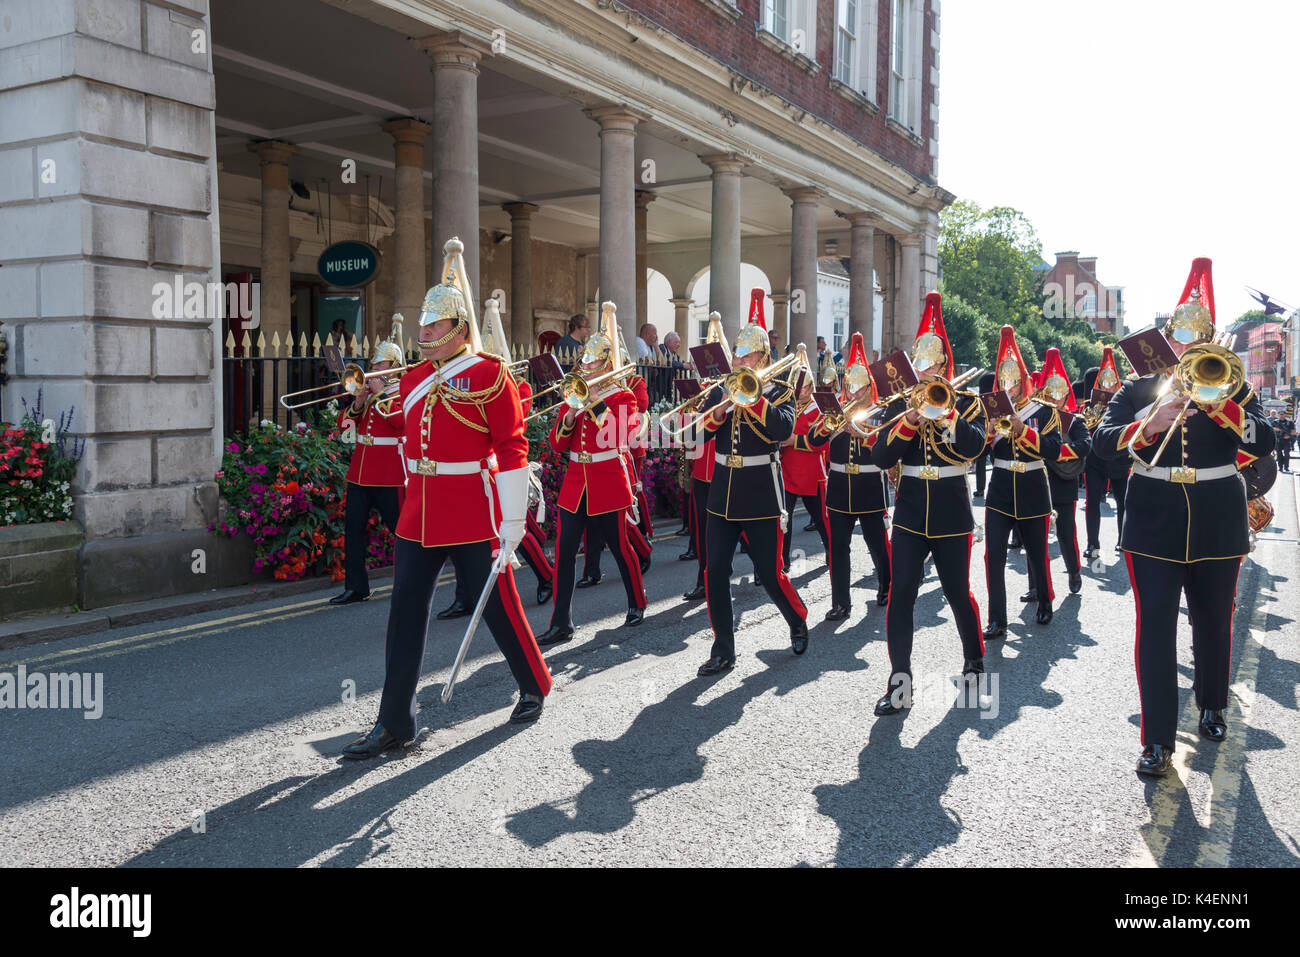 The Changing of the Guard parade, High Street, Windsor, Berkshire, England, United Kingdom Stock Photo